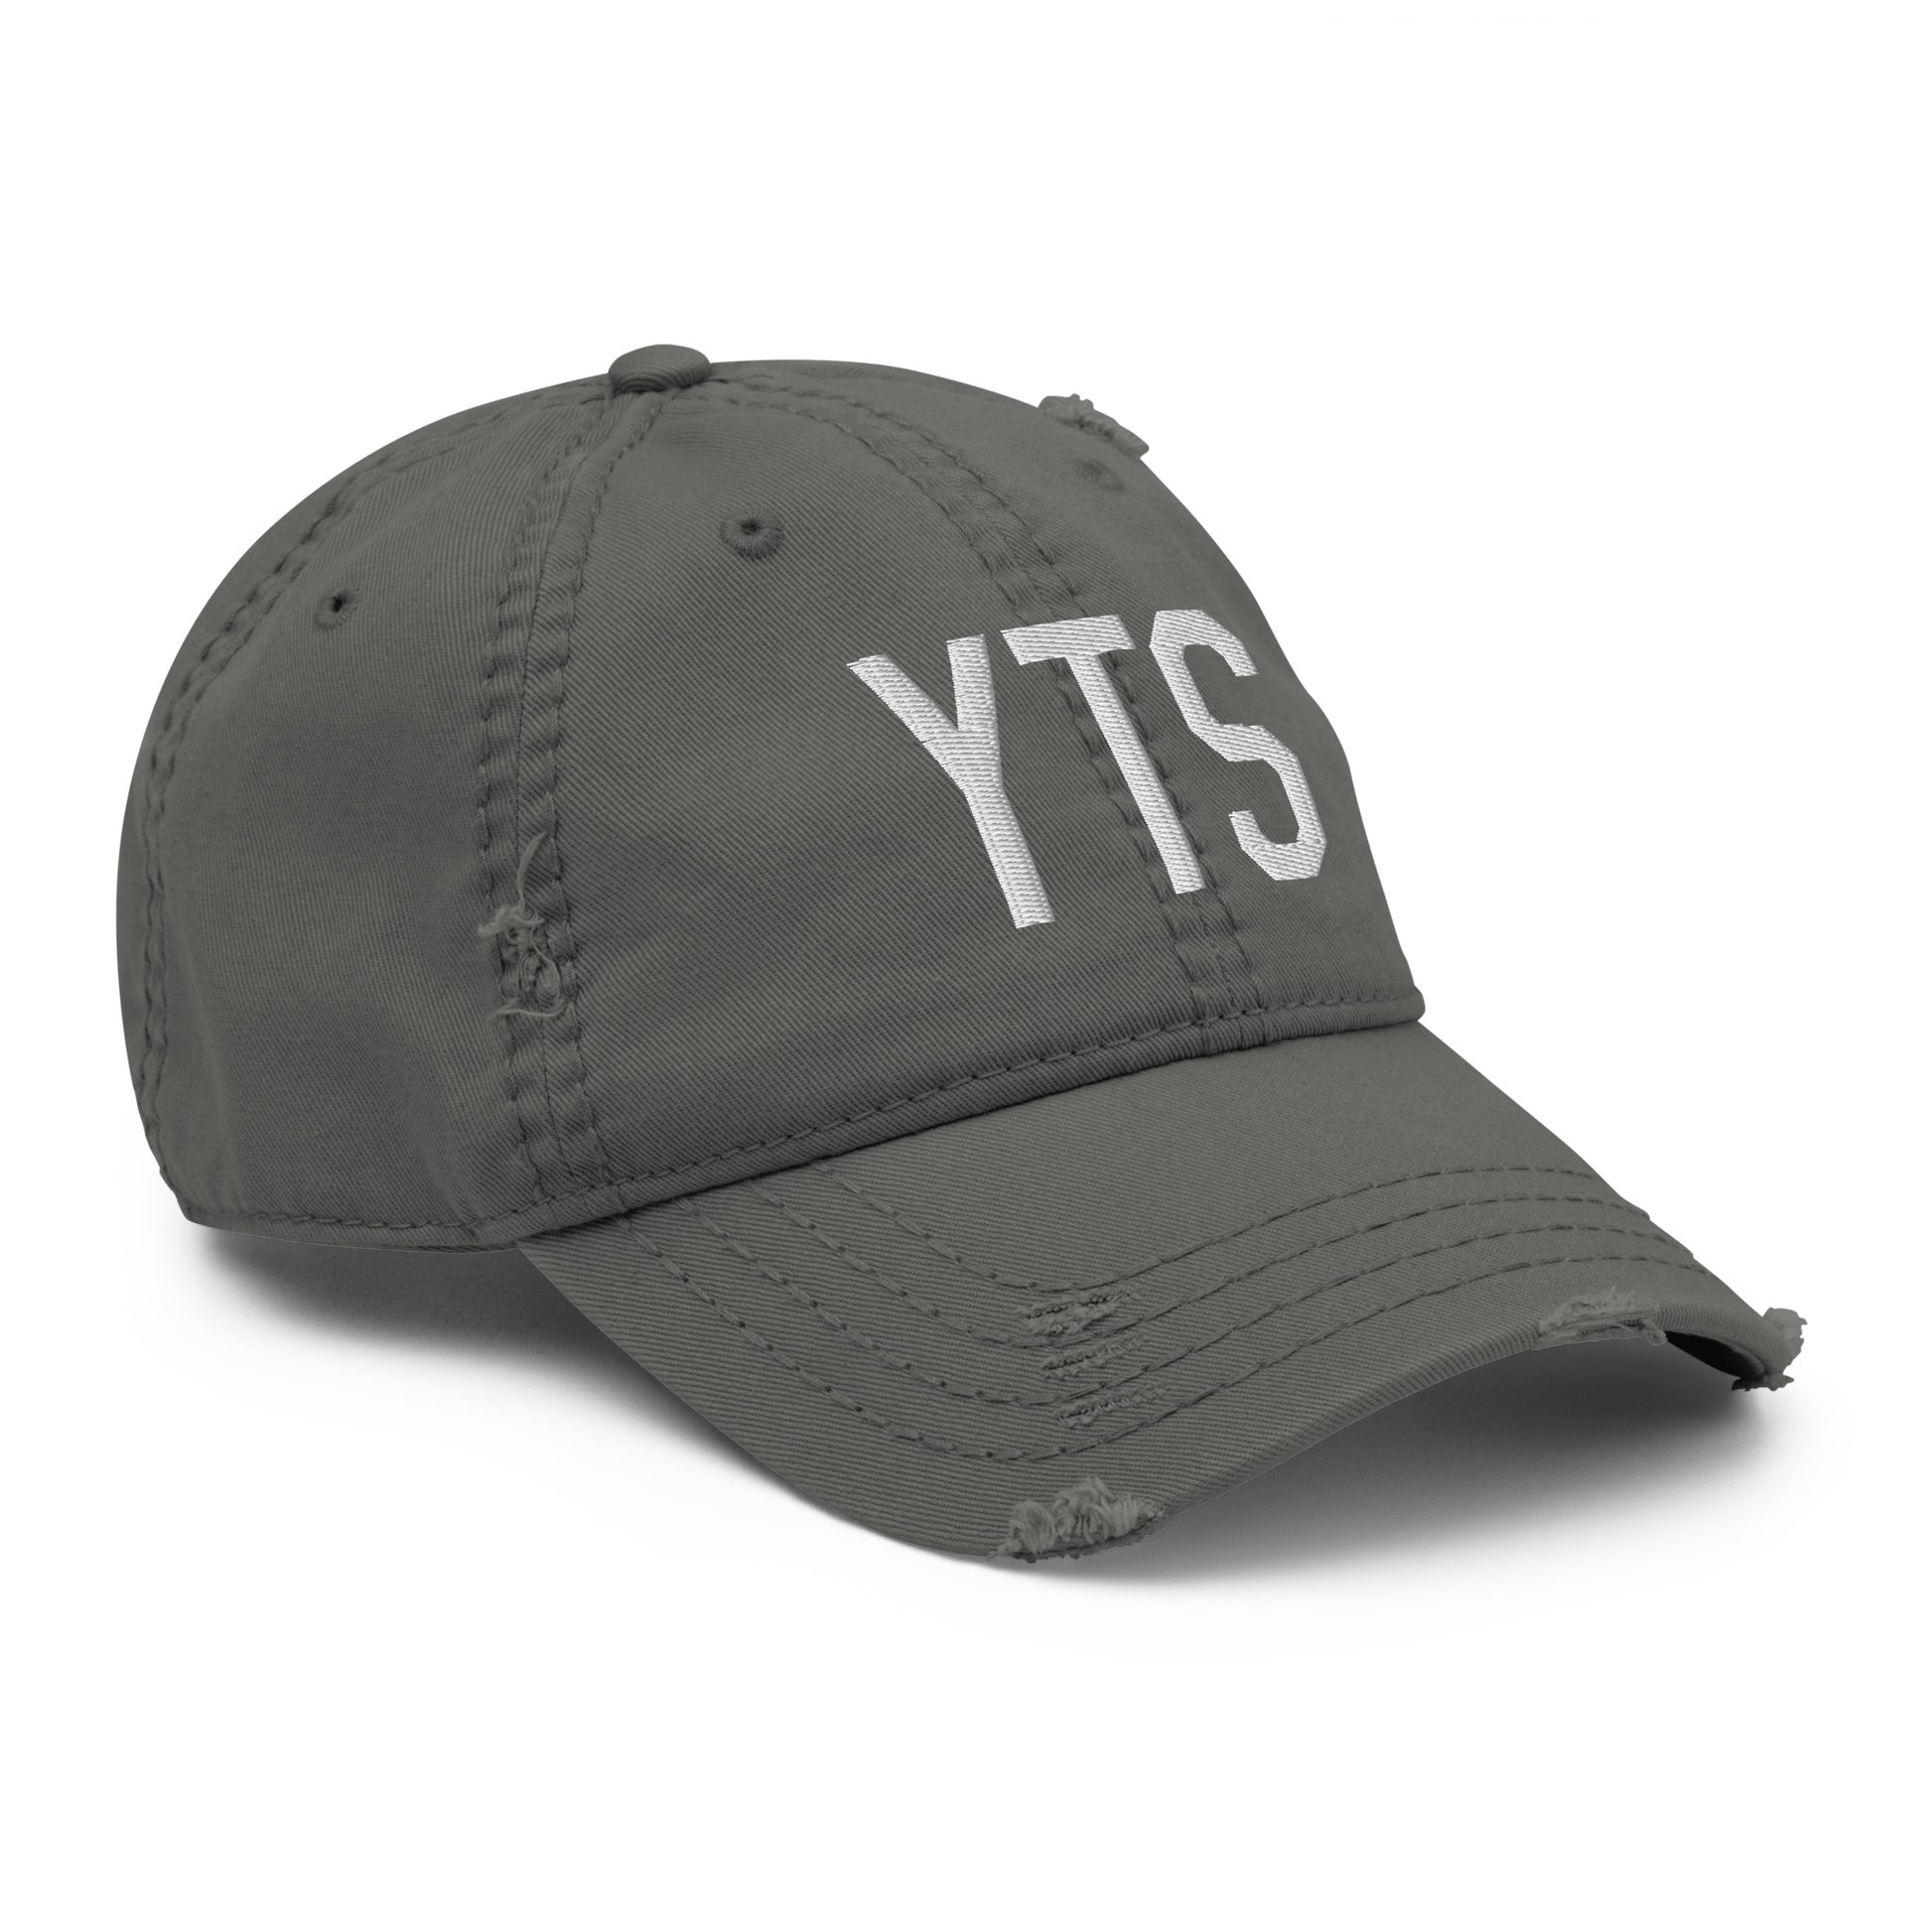 Airport Code Distressed Hat - White • YTS Timmins • YHM Designs - Image 17